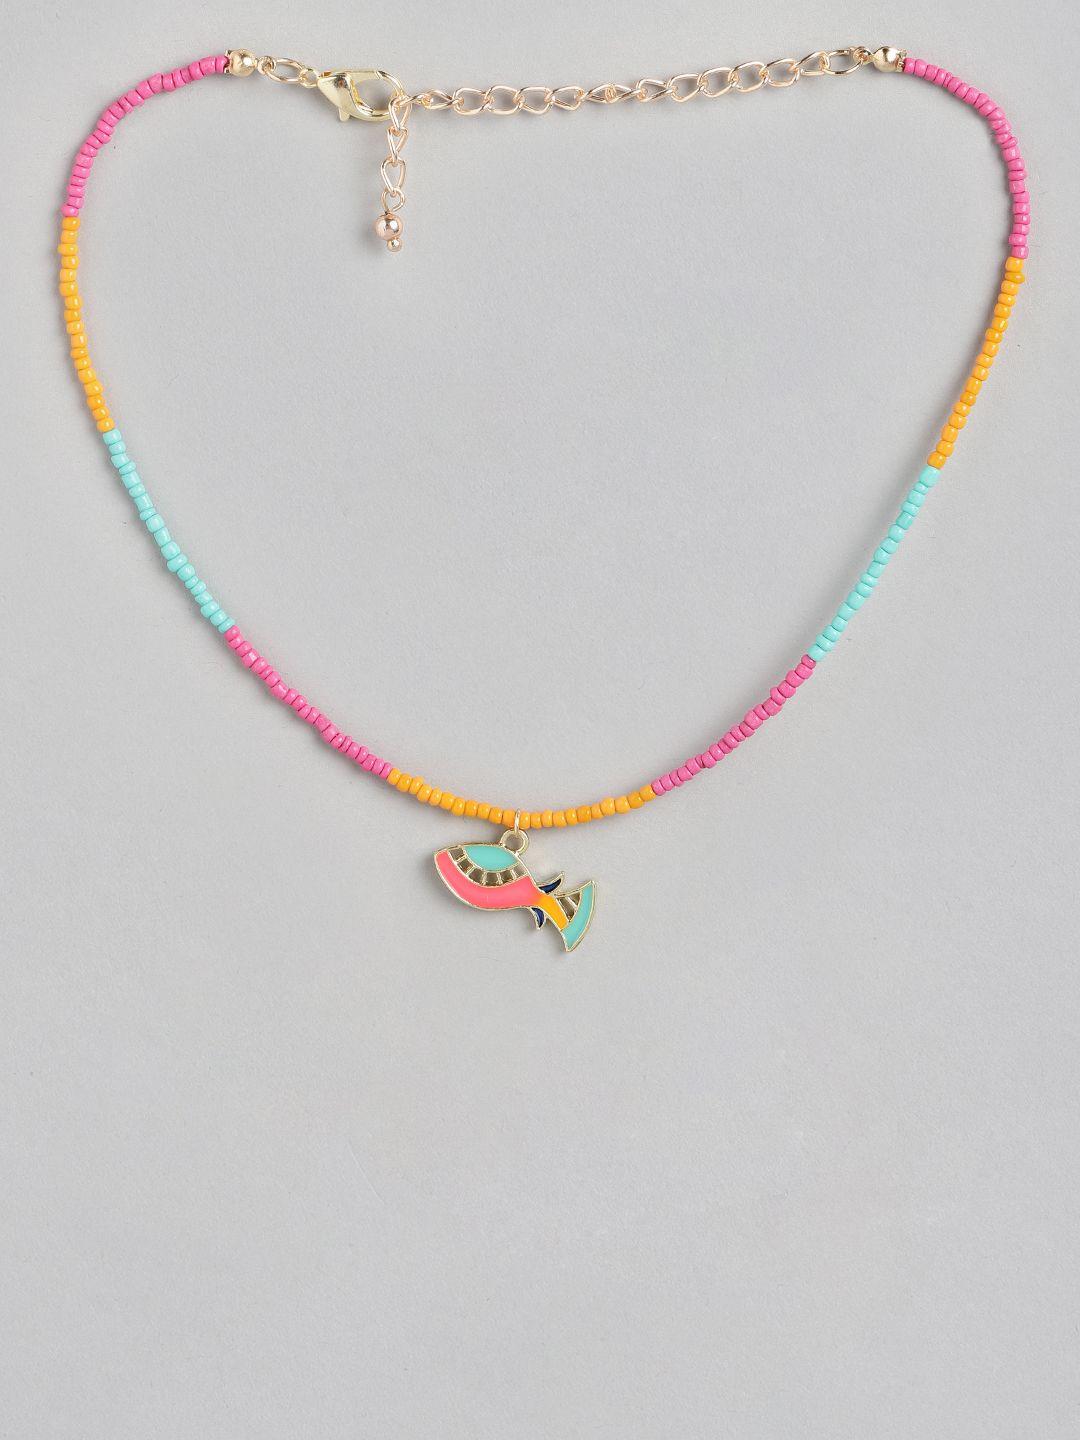 blueberry kids girls orange & pink gold-plated handcrafted beaded fish charm necklace